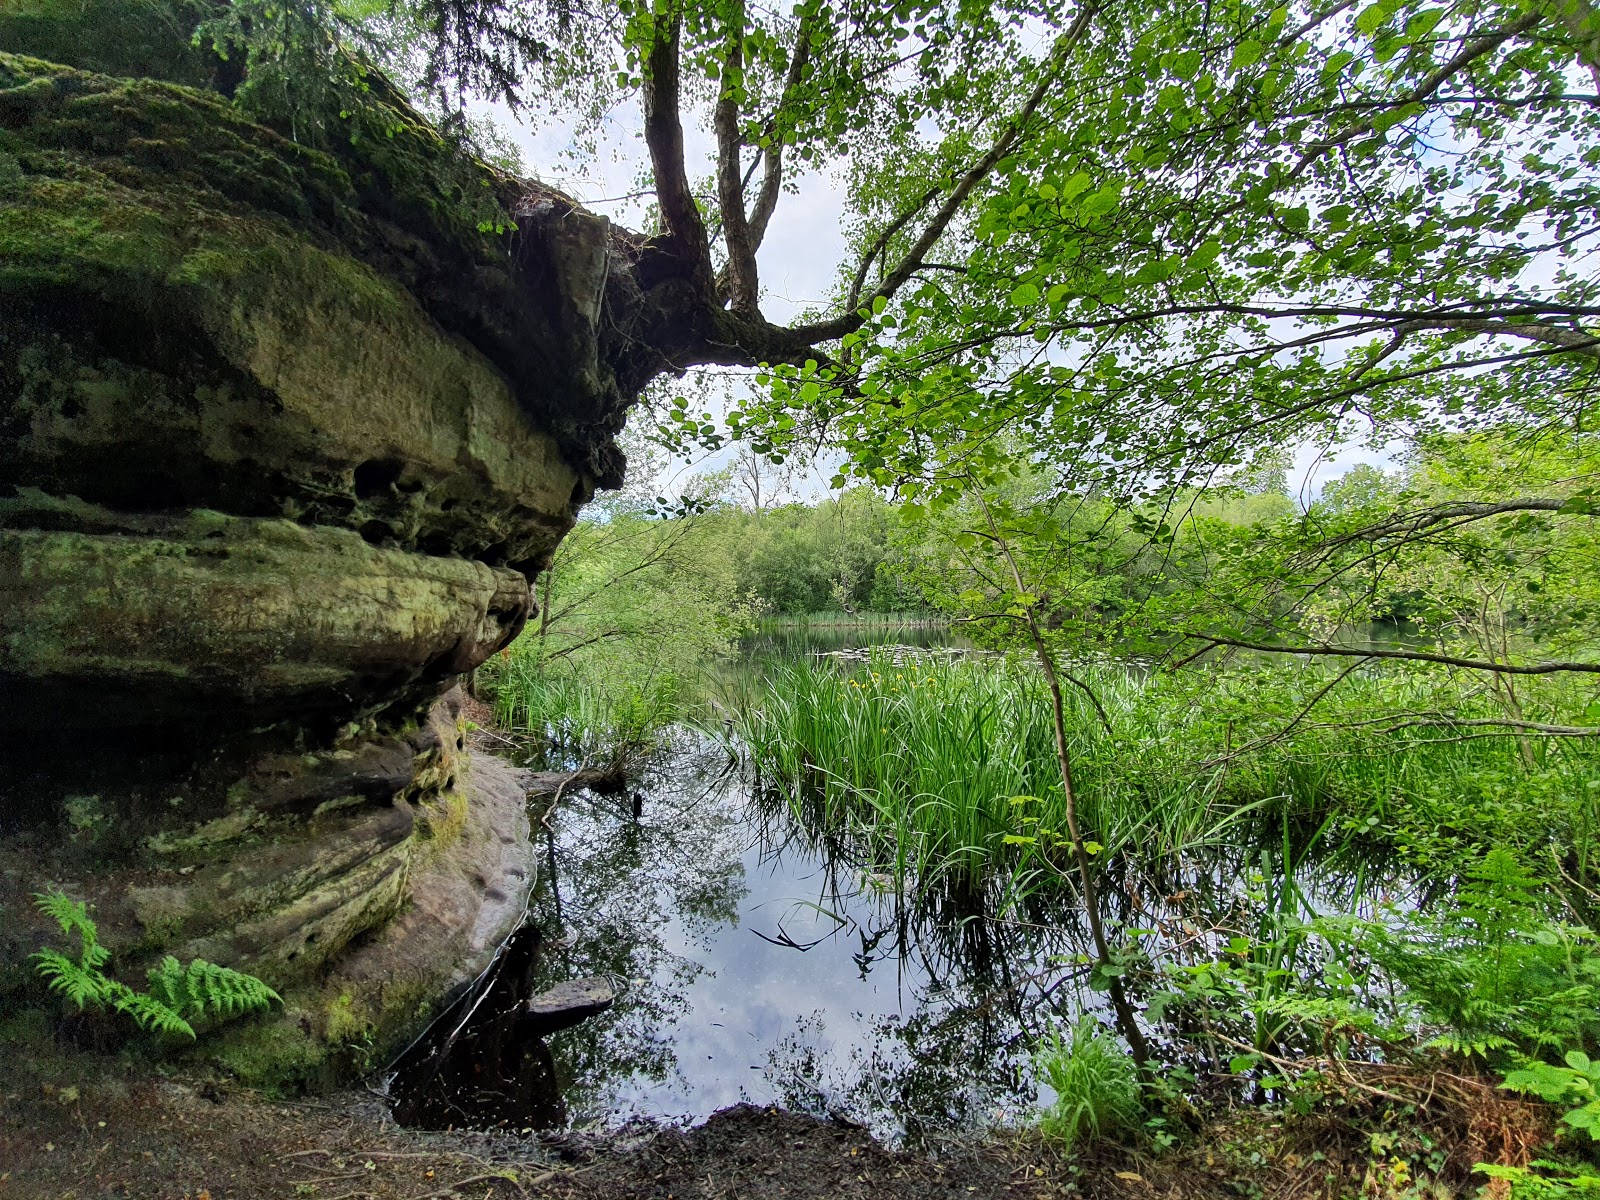 https://whatremovals.co.uk/wp-content/uploads/2022/02/West park local nature reserve-300x225.jpeg